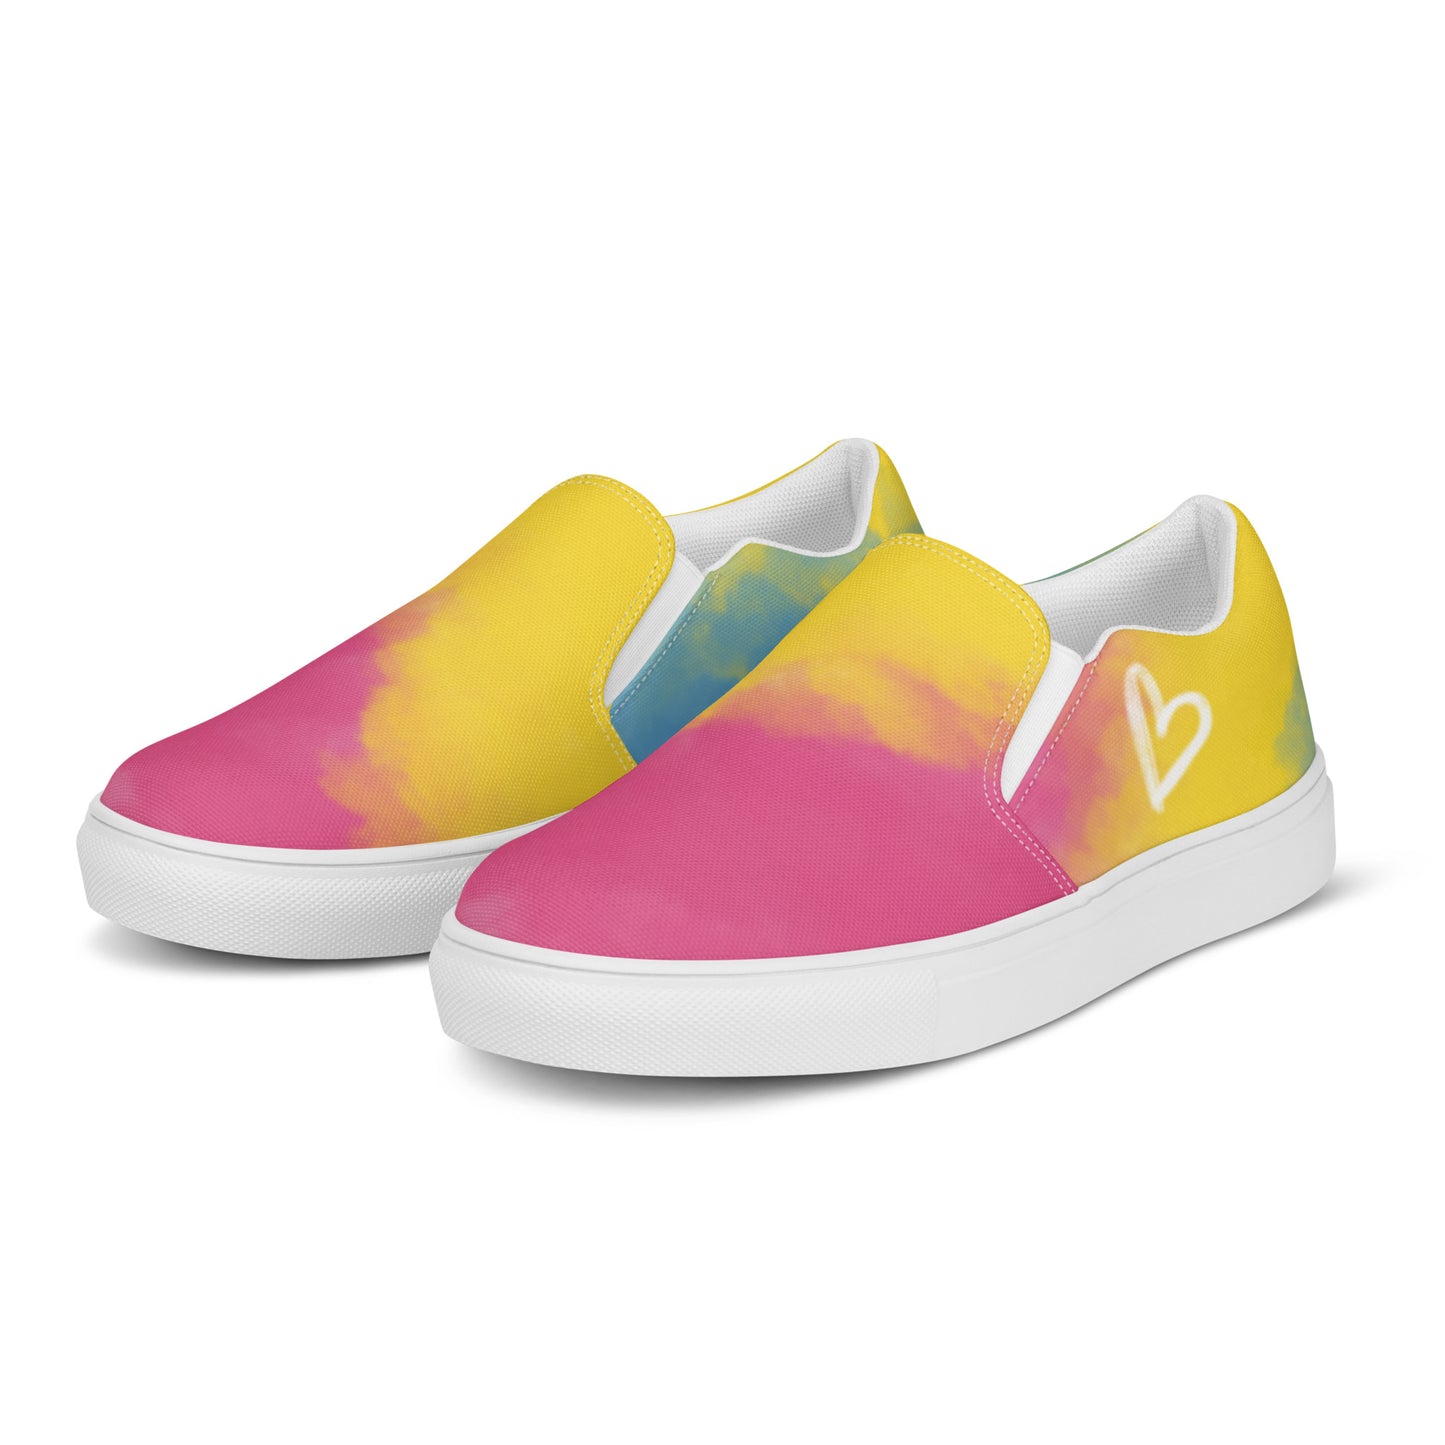 Left front view: a pair of slip on shoes with color block pink, yellow, and blue clouds, a white hand drawn heart, and the Aras Sivad logo on the back.